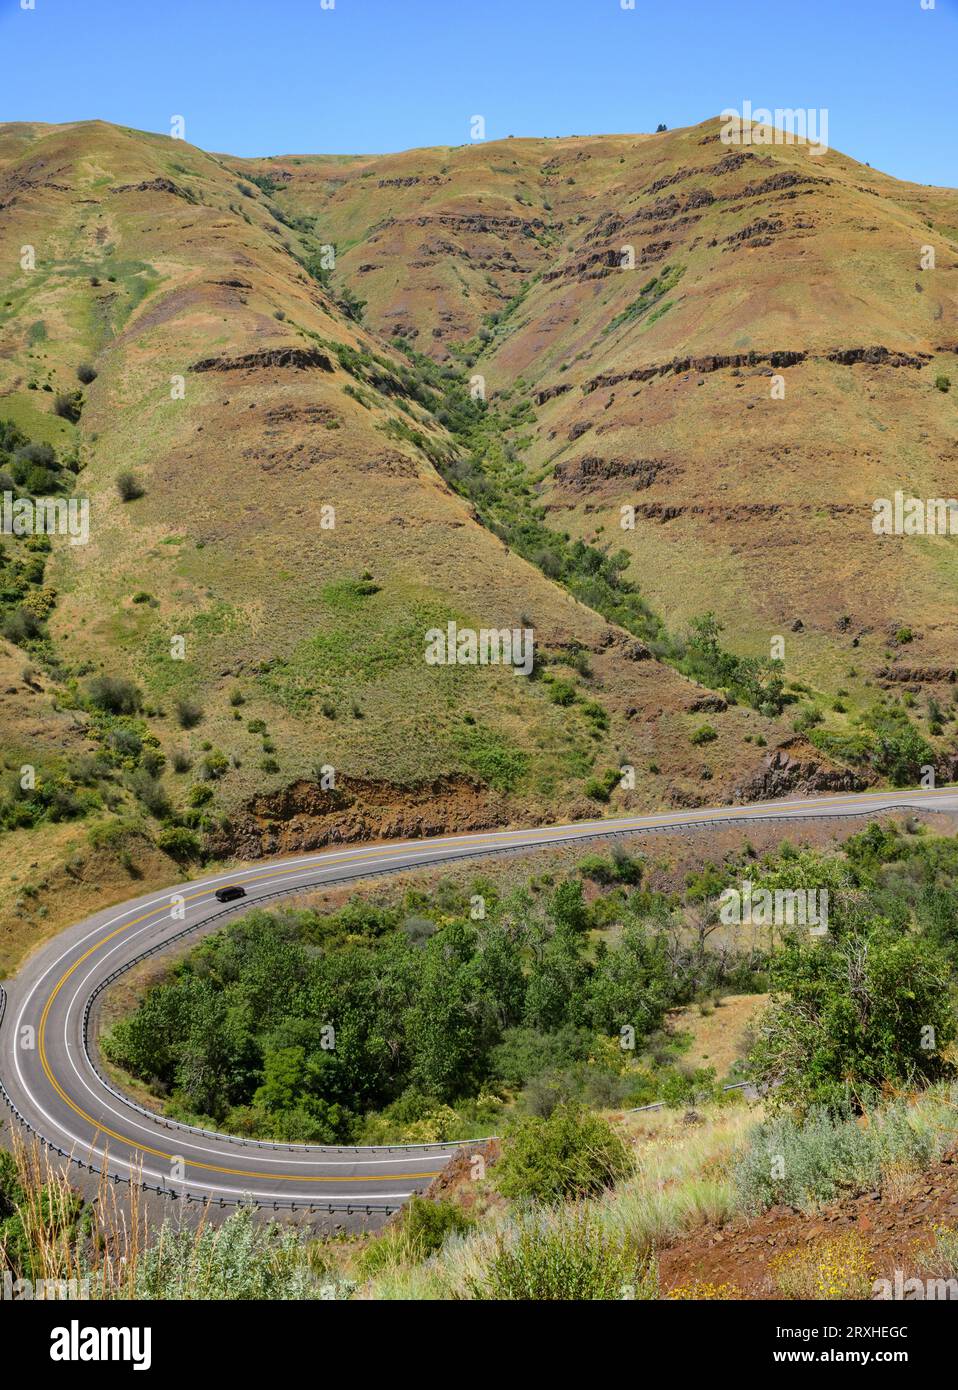 A car making the turn on a curvy section of Highway 129 in Eastern Washington near the Oregon border; Clarkston, Washington, United States of America Stock Photo